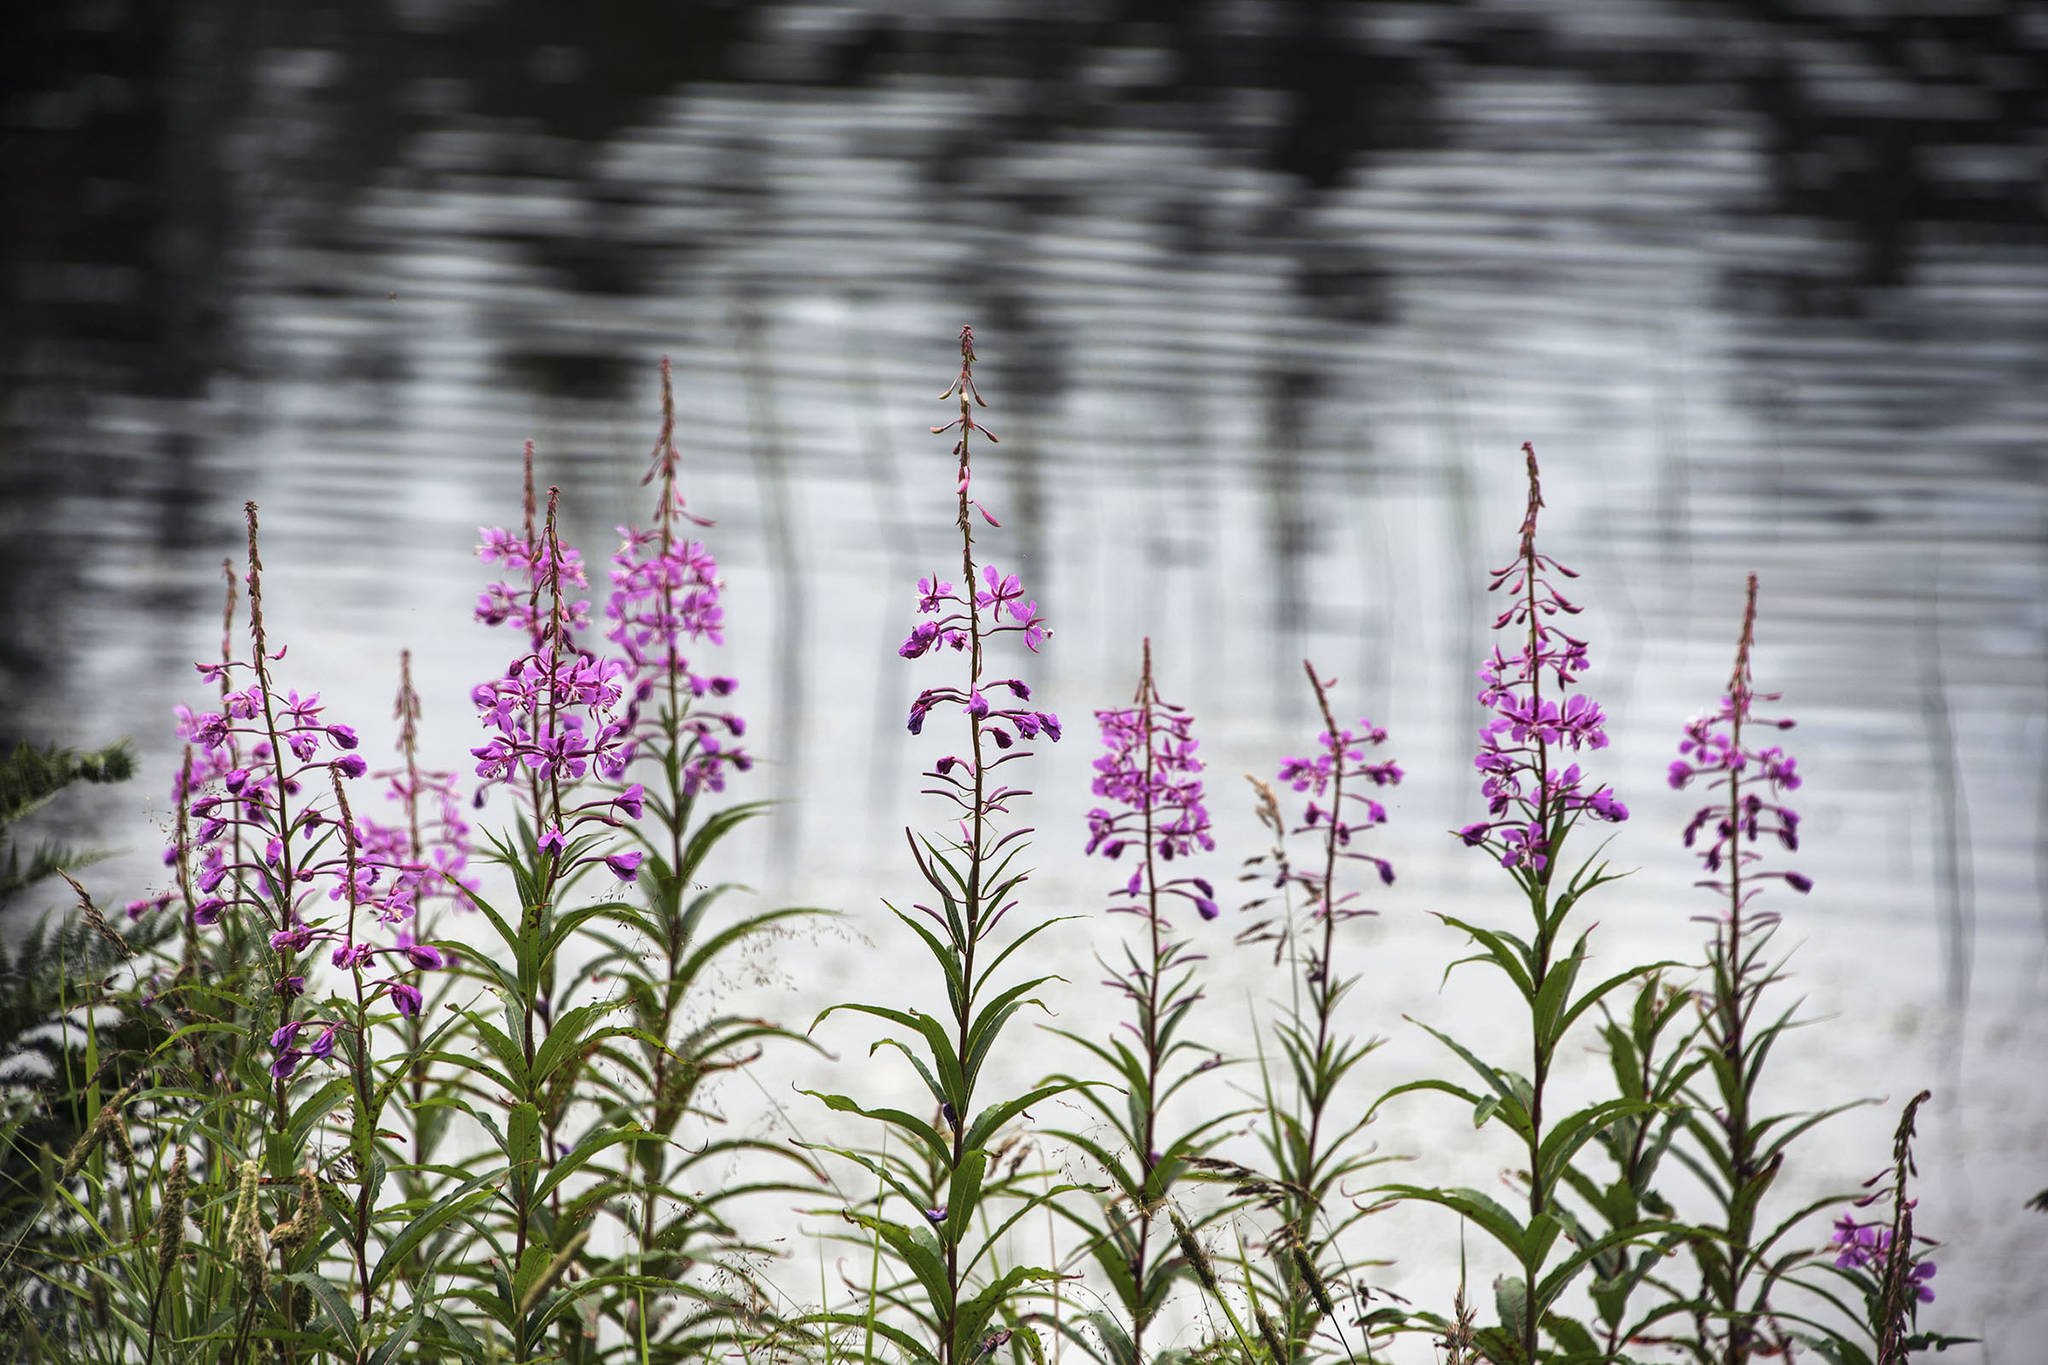 This photo shows Fireweed Pond by salt chuck on Aug. 6, 2020(Courtesy Photo | Kenneth Gill, gillfoto)